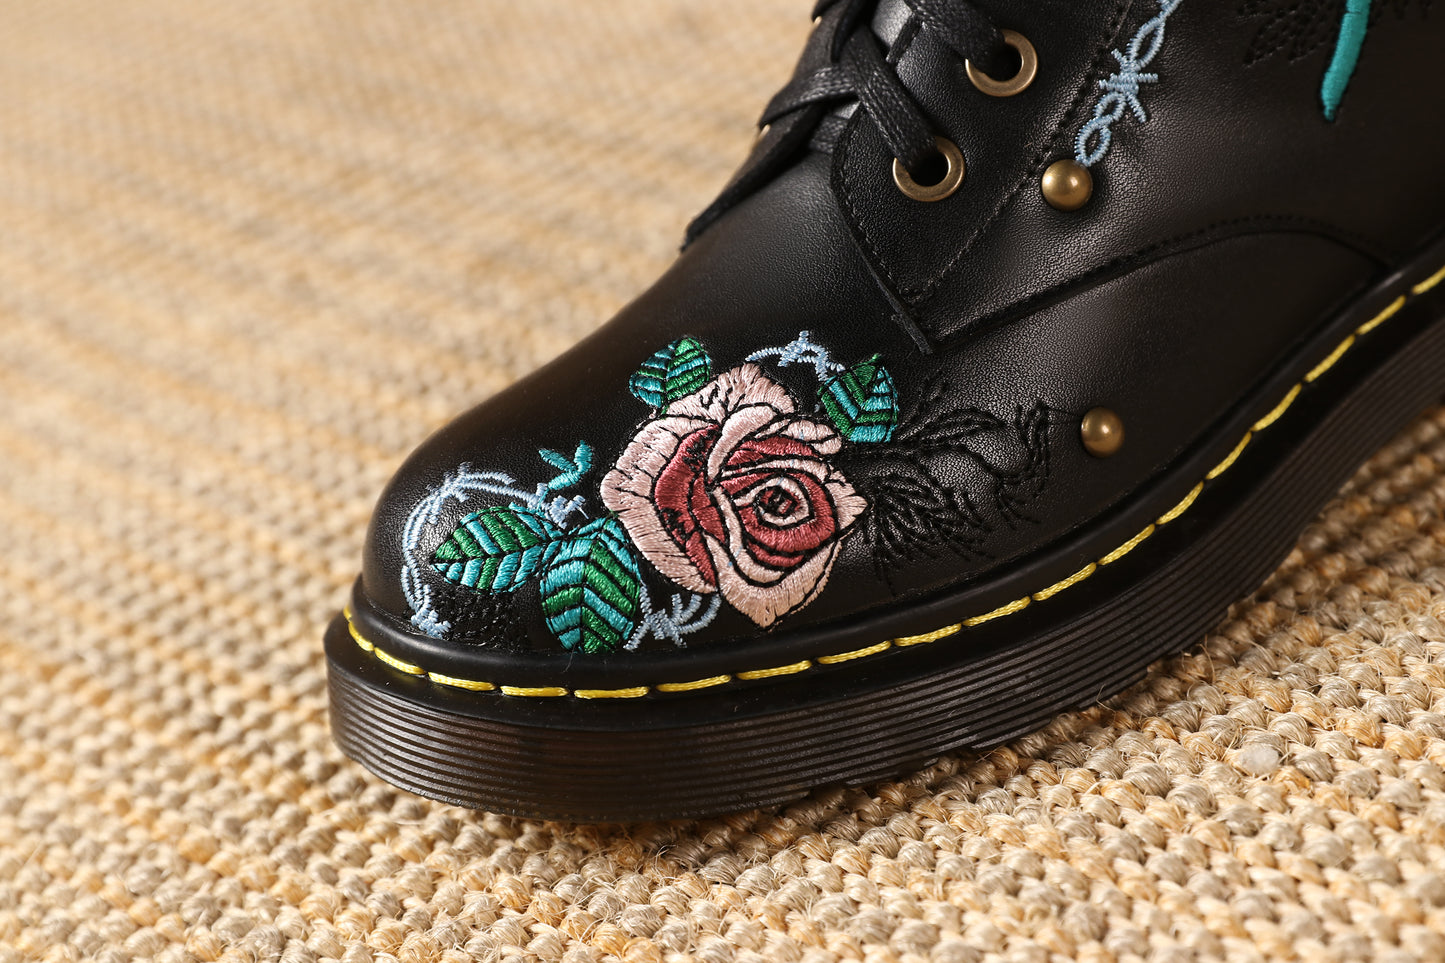 TinaCus Handmade Women's Genuine Leather Ethnic Embroidered Floral Round Toe Low Chunky Heel Front Lace Up Combat Boots